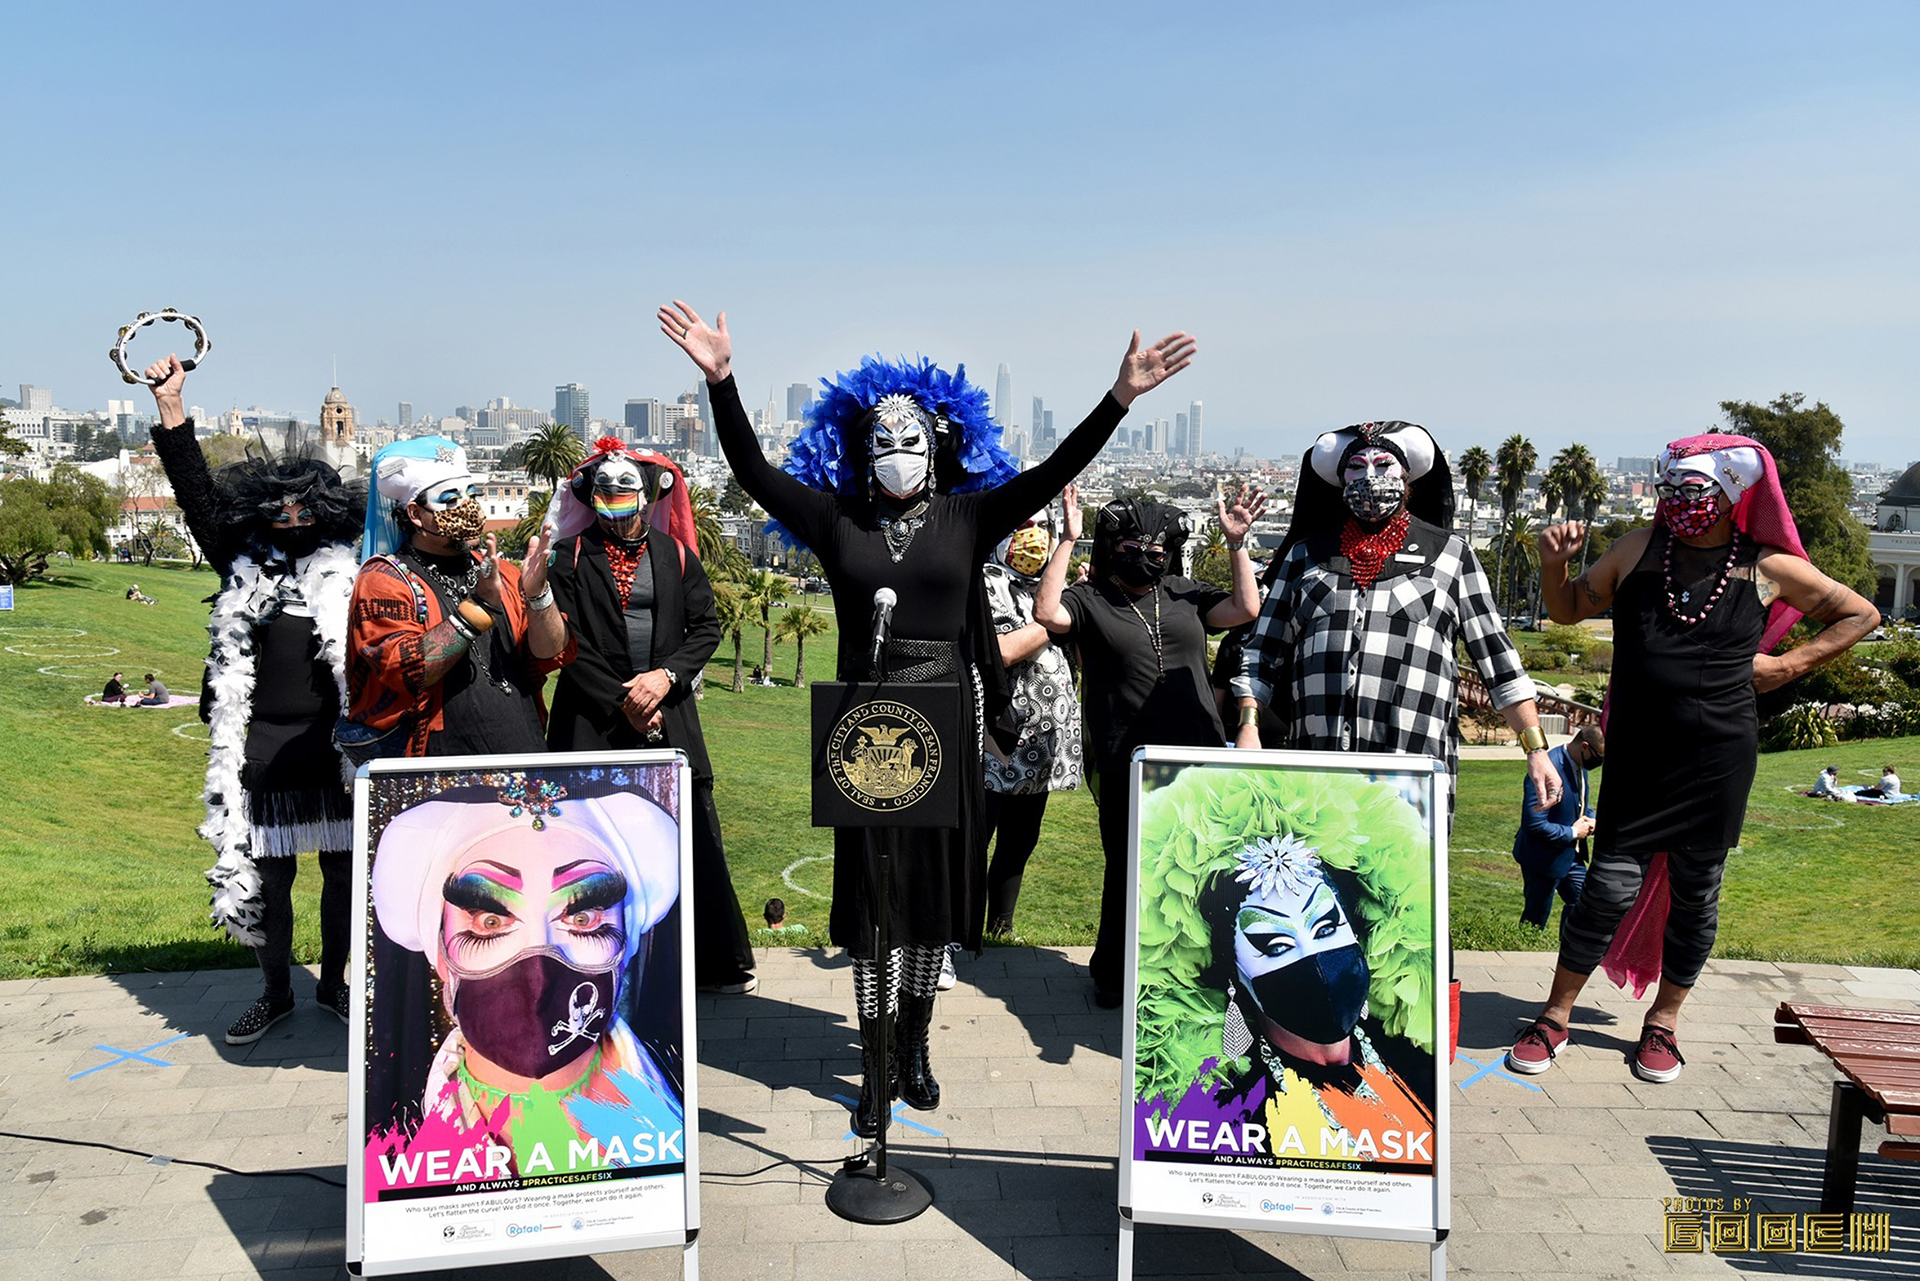 Seven "sisters" in their drag nun attire stand in front of Dolores Park in San Francisco. Near them is a sign that says "wear a mask." They are all wearing masks as well.